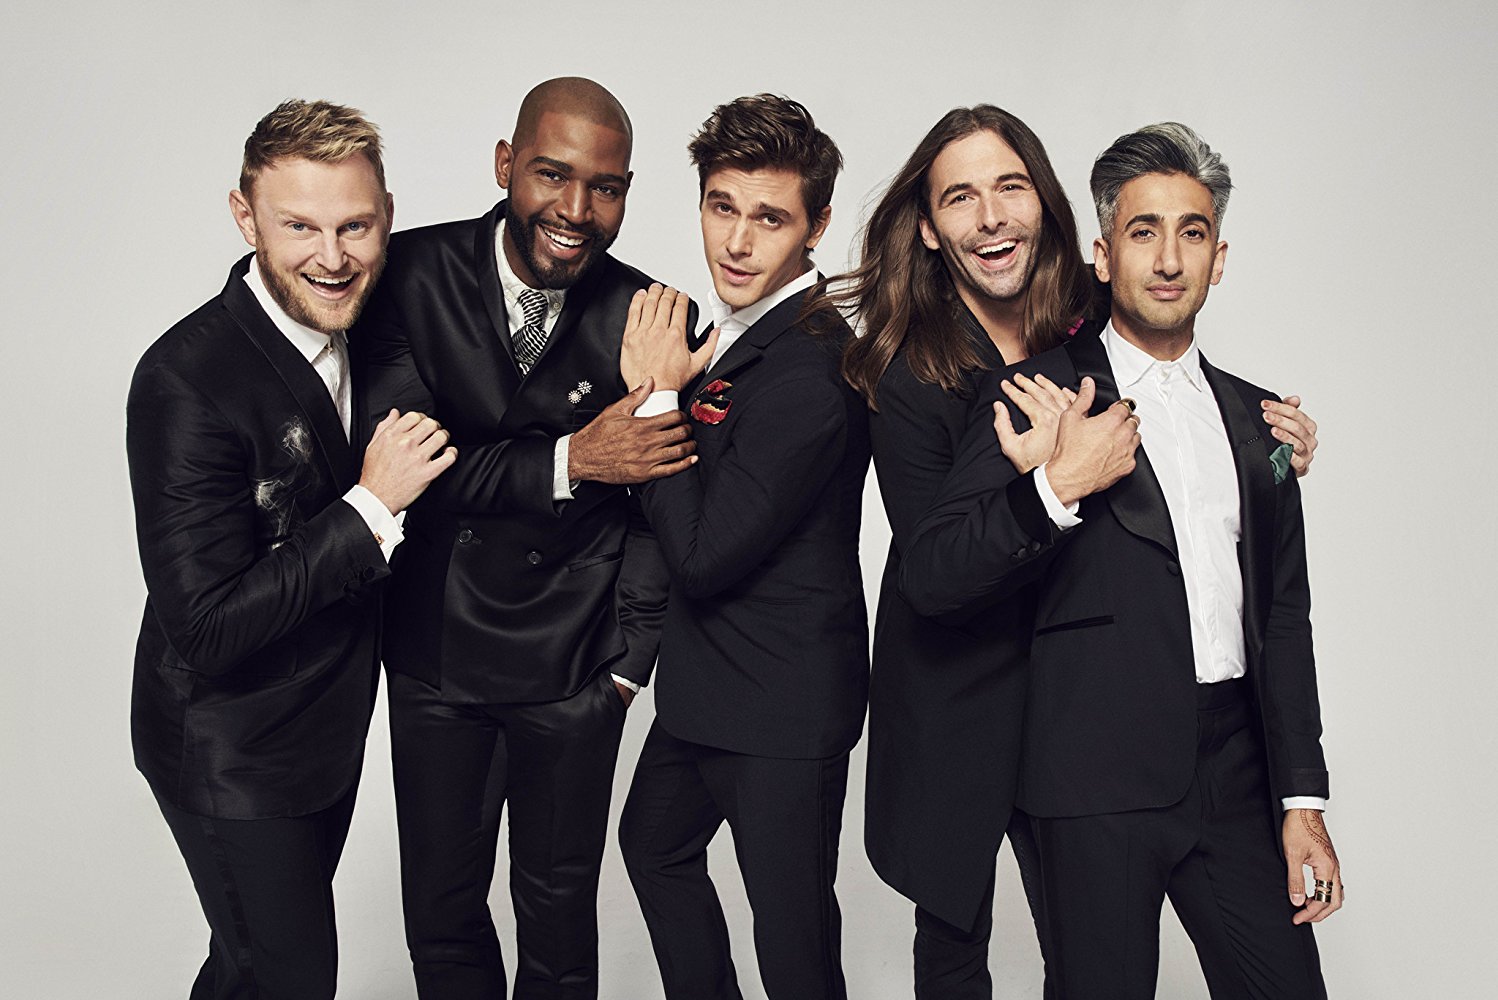 PHOTO: The guys from "Queer Eye" are seen here. 